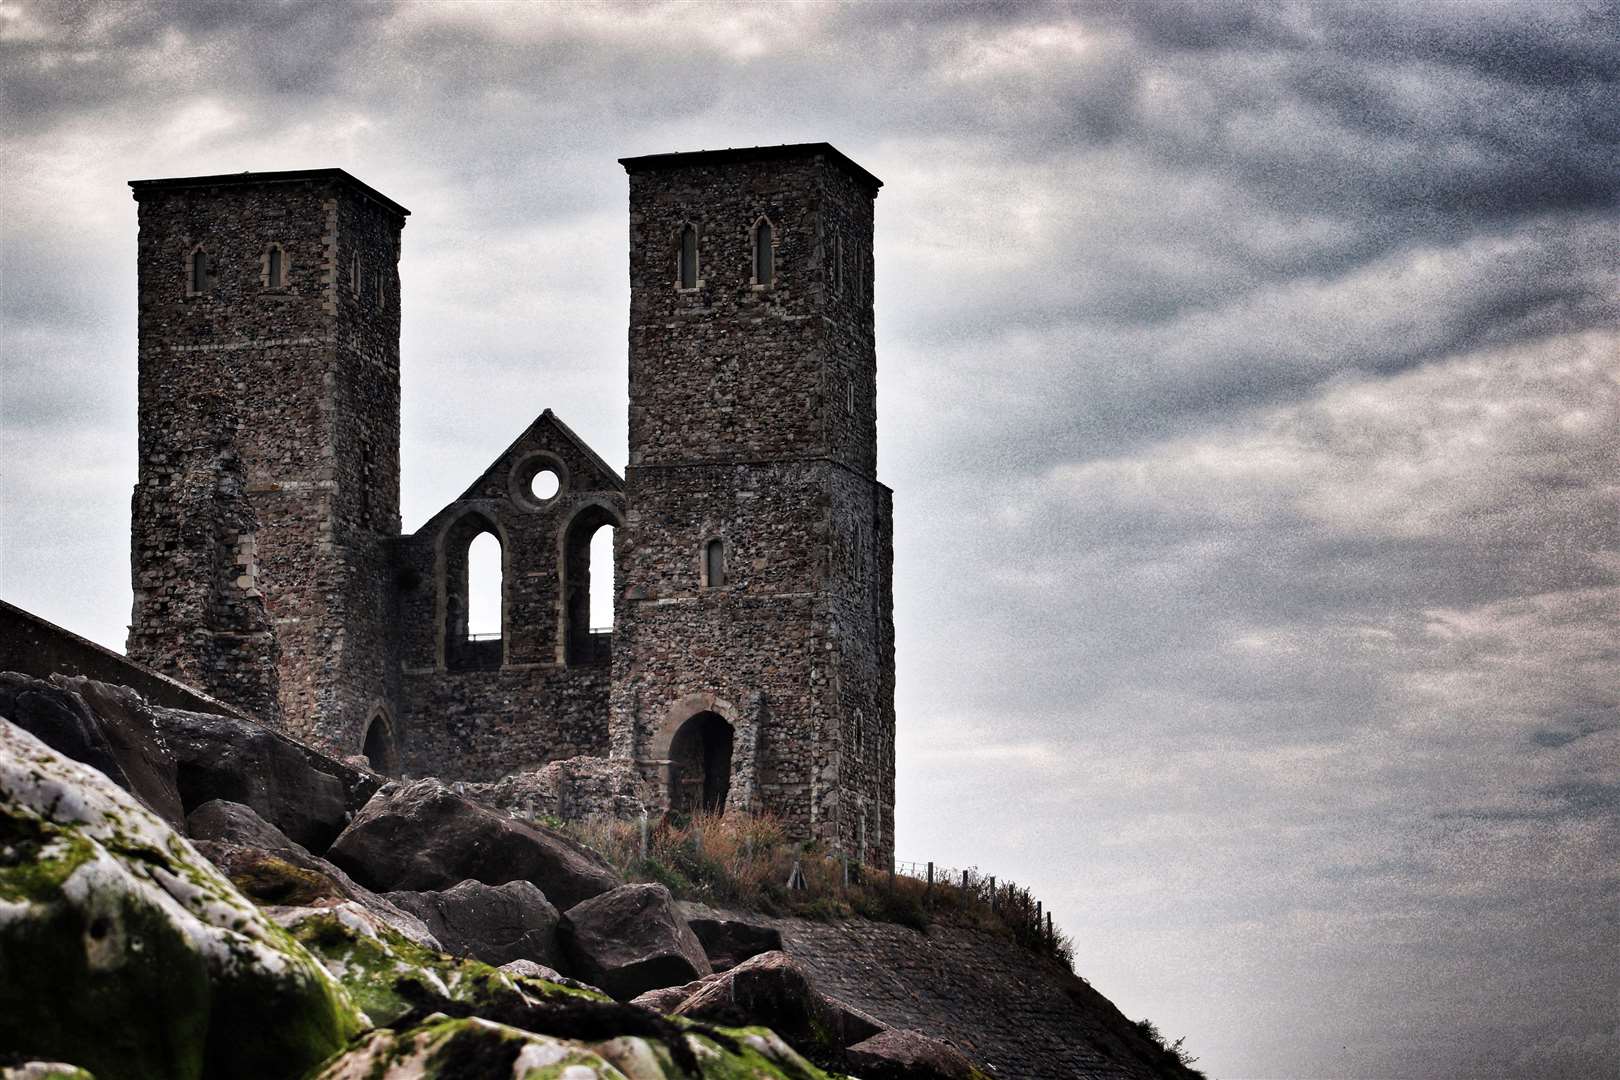 The old Roman fortress at Reculver was one of the guarding points of the Wantsum Channel which cut off Thanet from the mainland. The isle became a popular location for Viking armies to camp out during the winter and launch raids from there. Picture: Jessica Delo